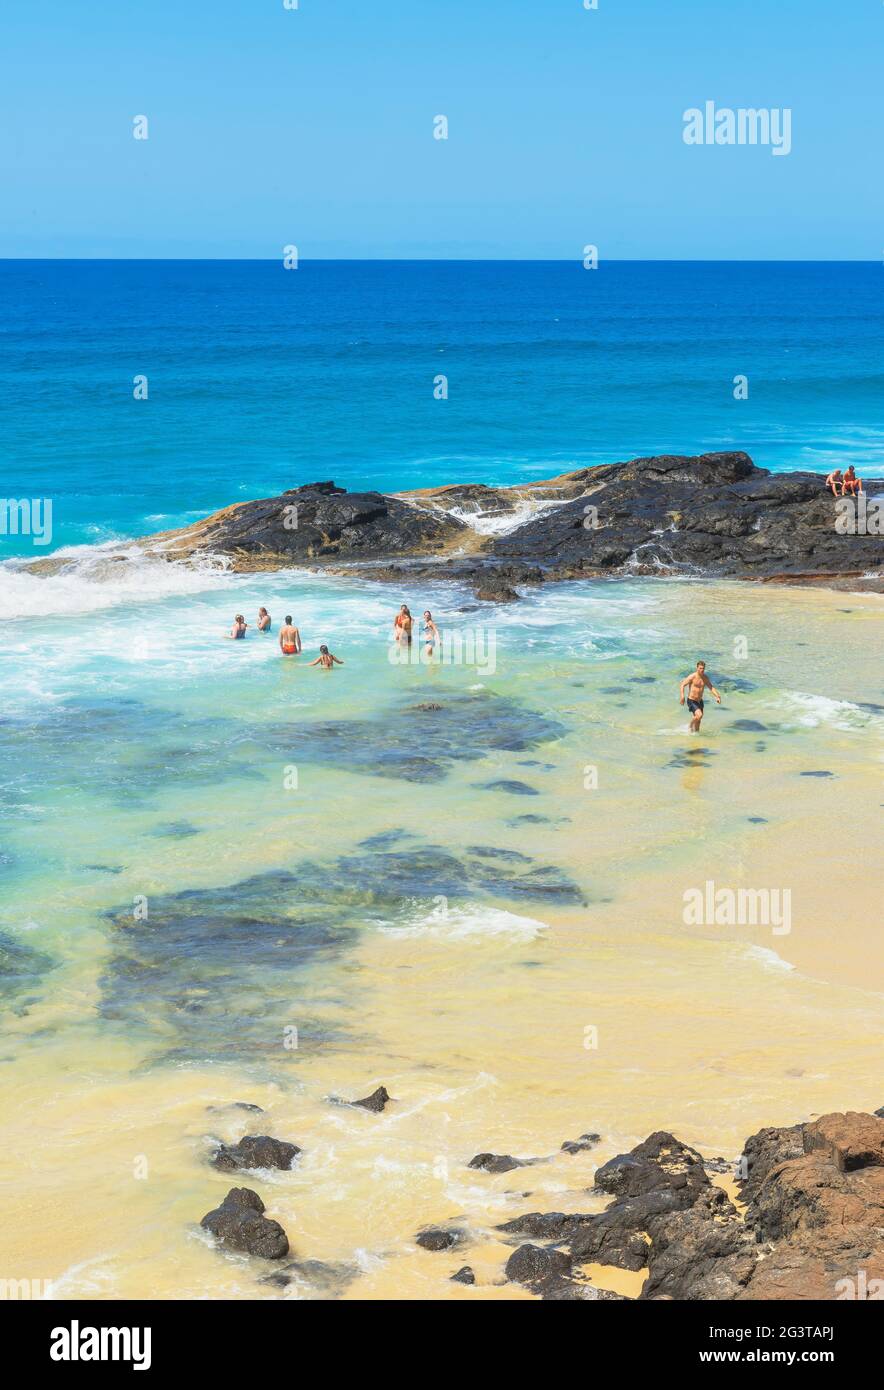 People swimming in Champagne pools, Great Sandy National Park, Fraser Island, Queensland, Australia, Stock Photo